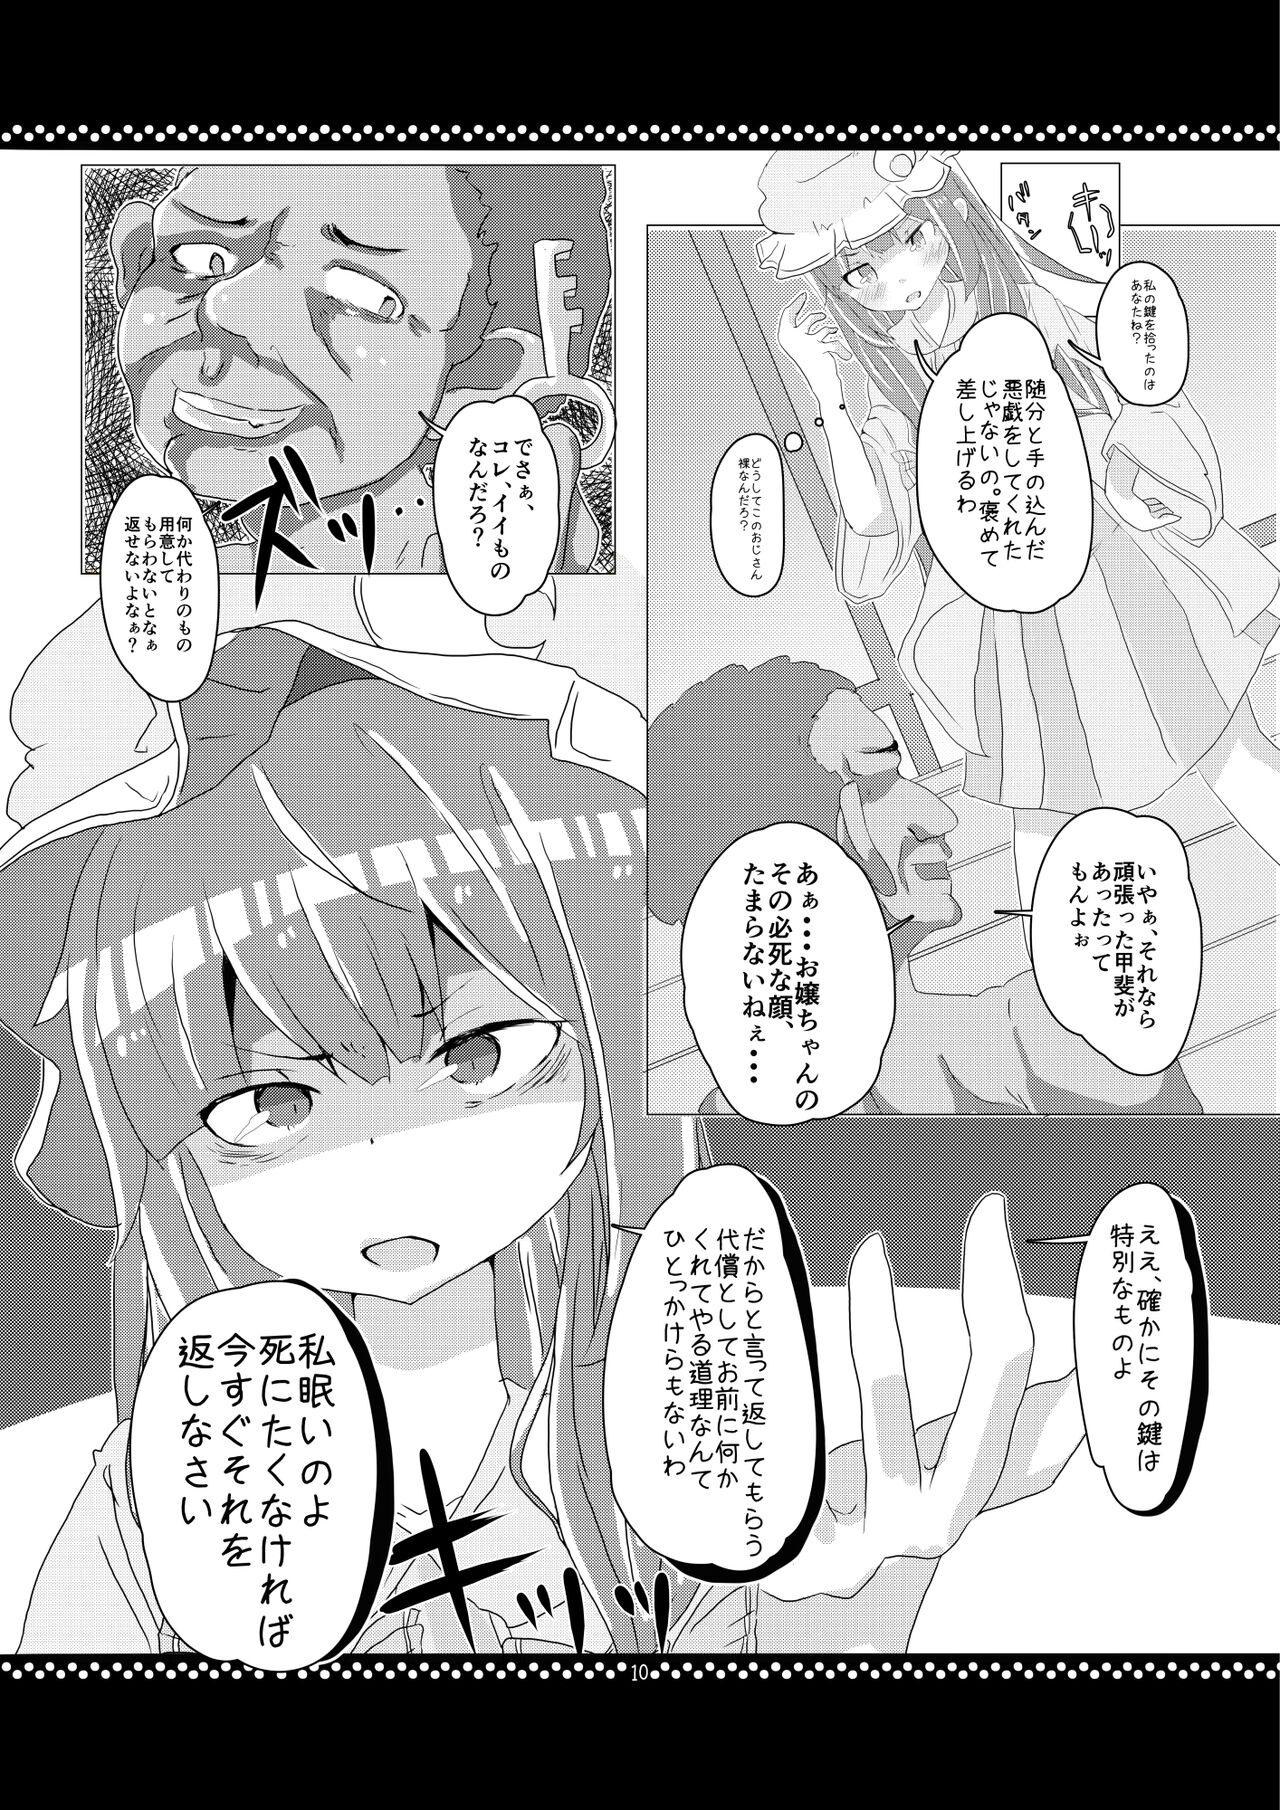 Amature Sex 従順？パチュリーさま！ - Touhou project One - Page 9